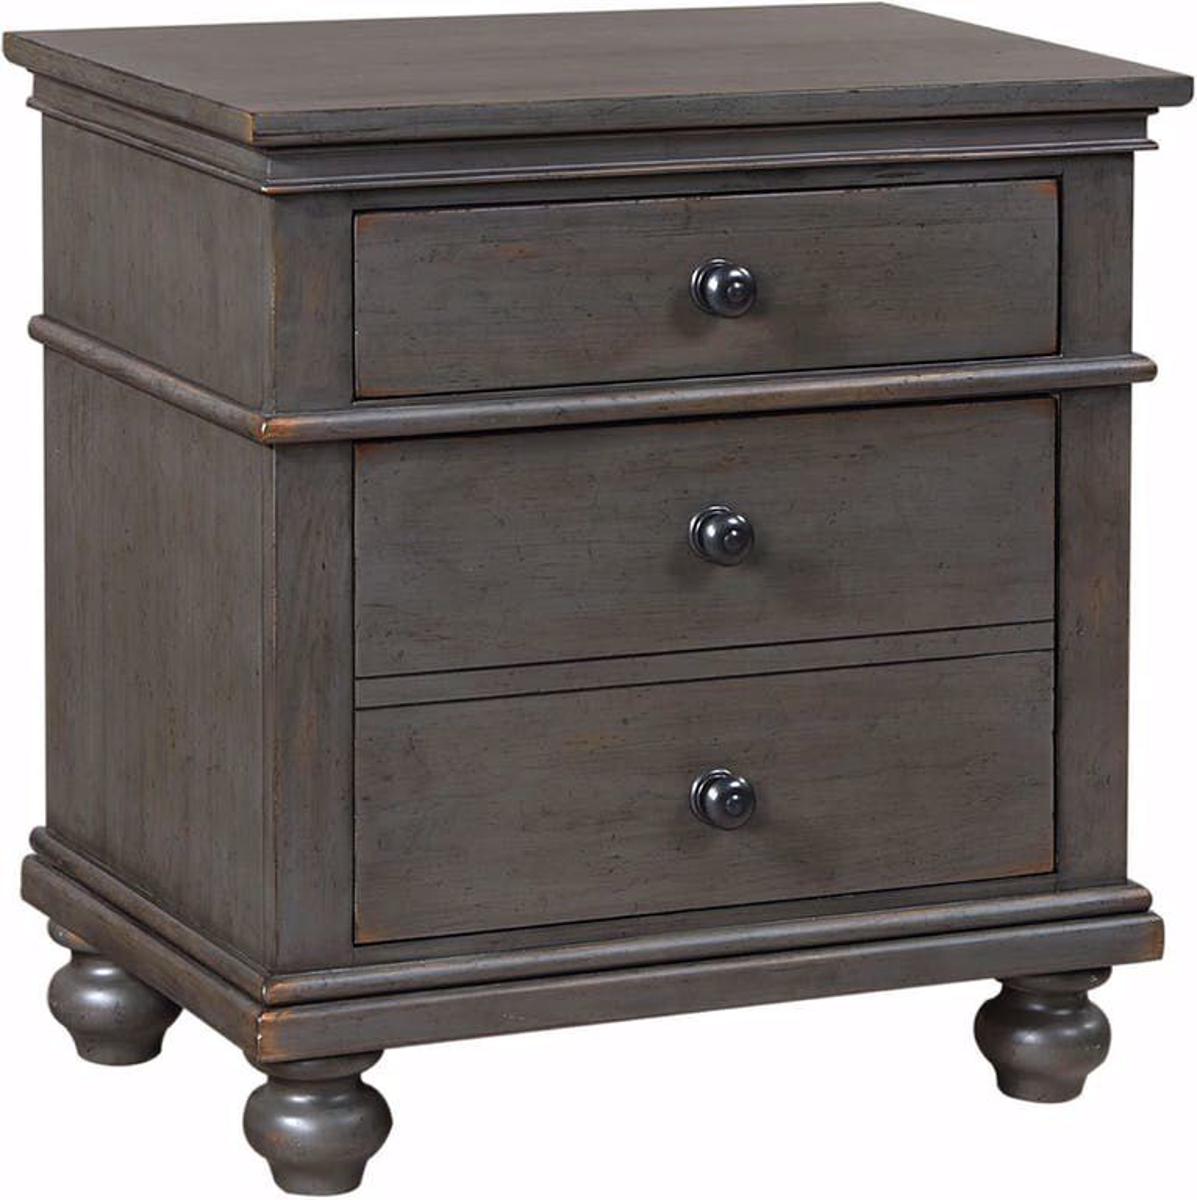 Picture of OXFORD PEPPERCORN BEDROOM COLLECTION